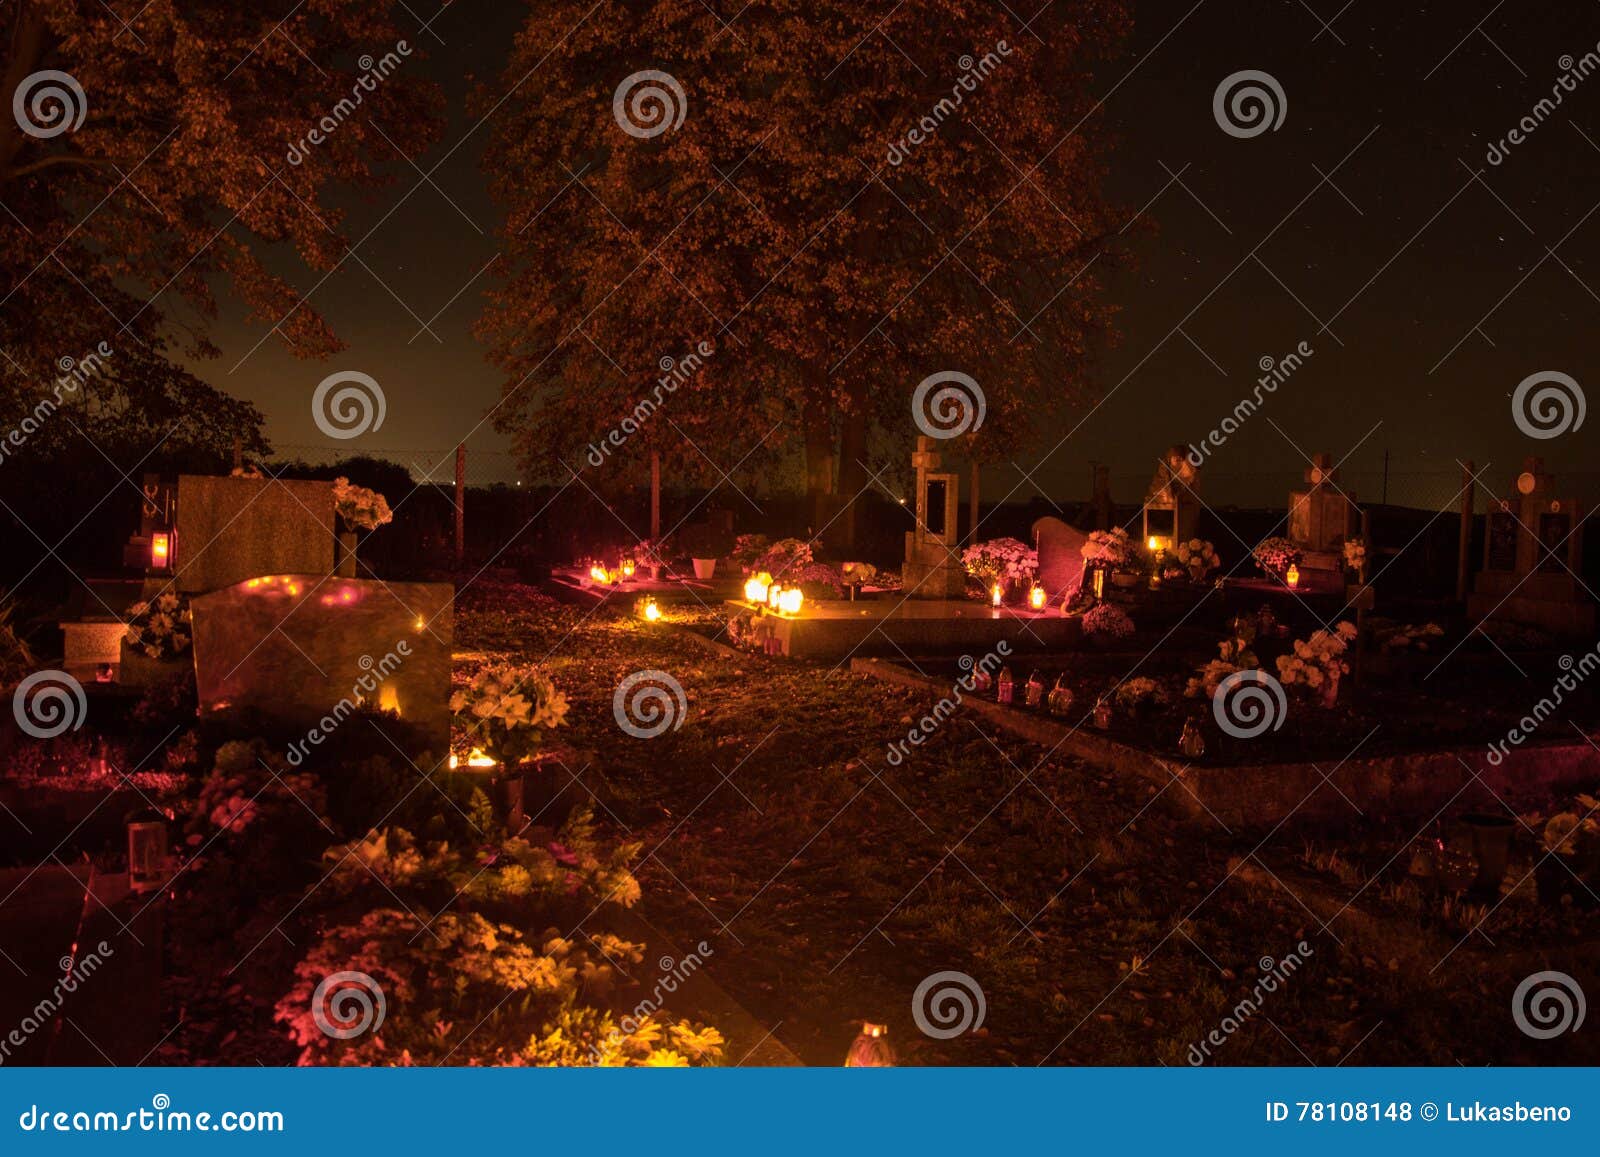 votive candles lantern burning on the graves in slovak cemetery at night time. all saints' day. solemnity of all saints